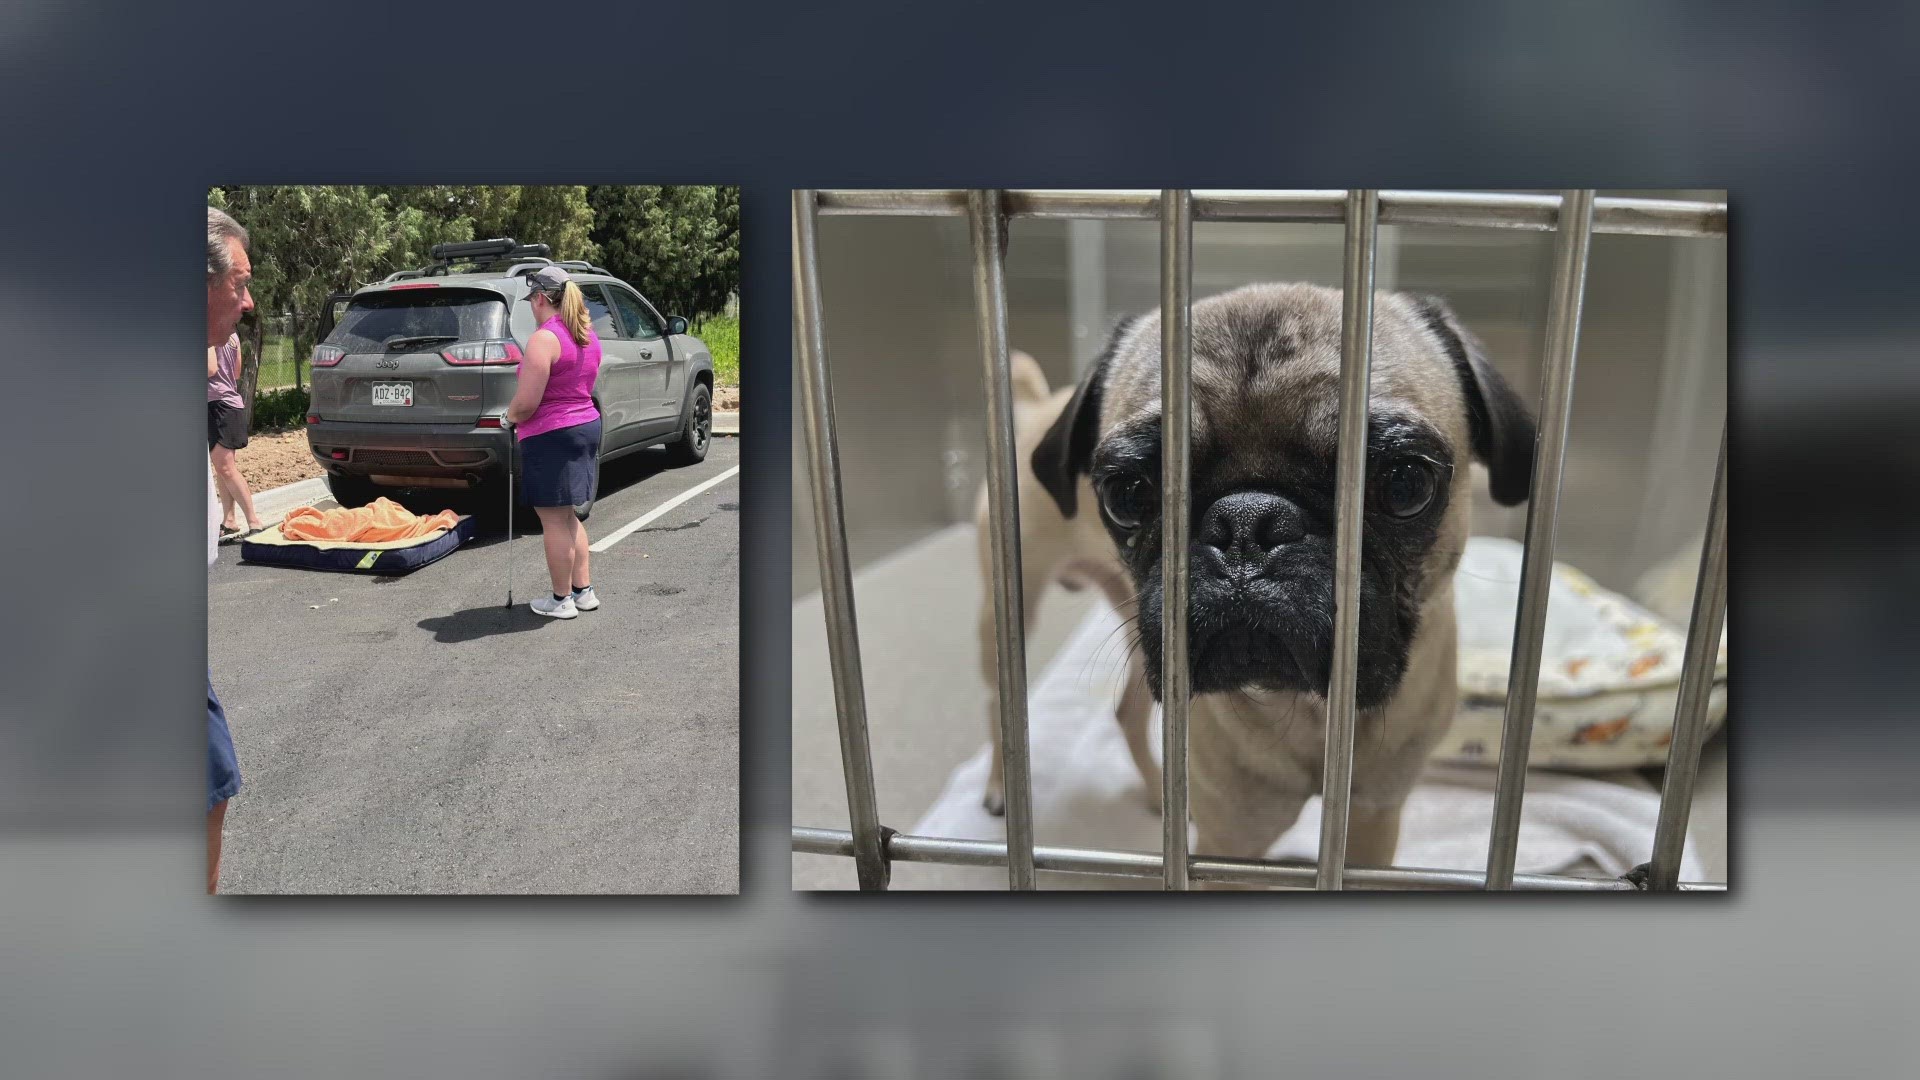 Denver has received more than 190 calls of animals left in cars since the beginning of the year.